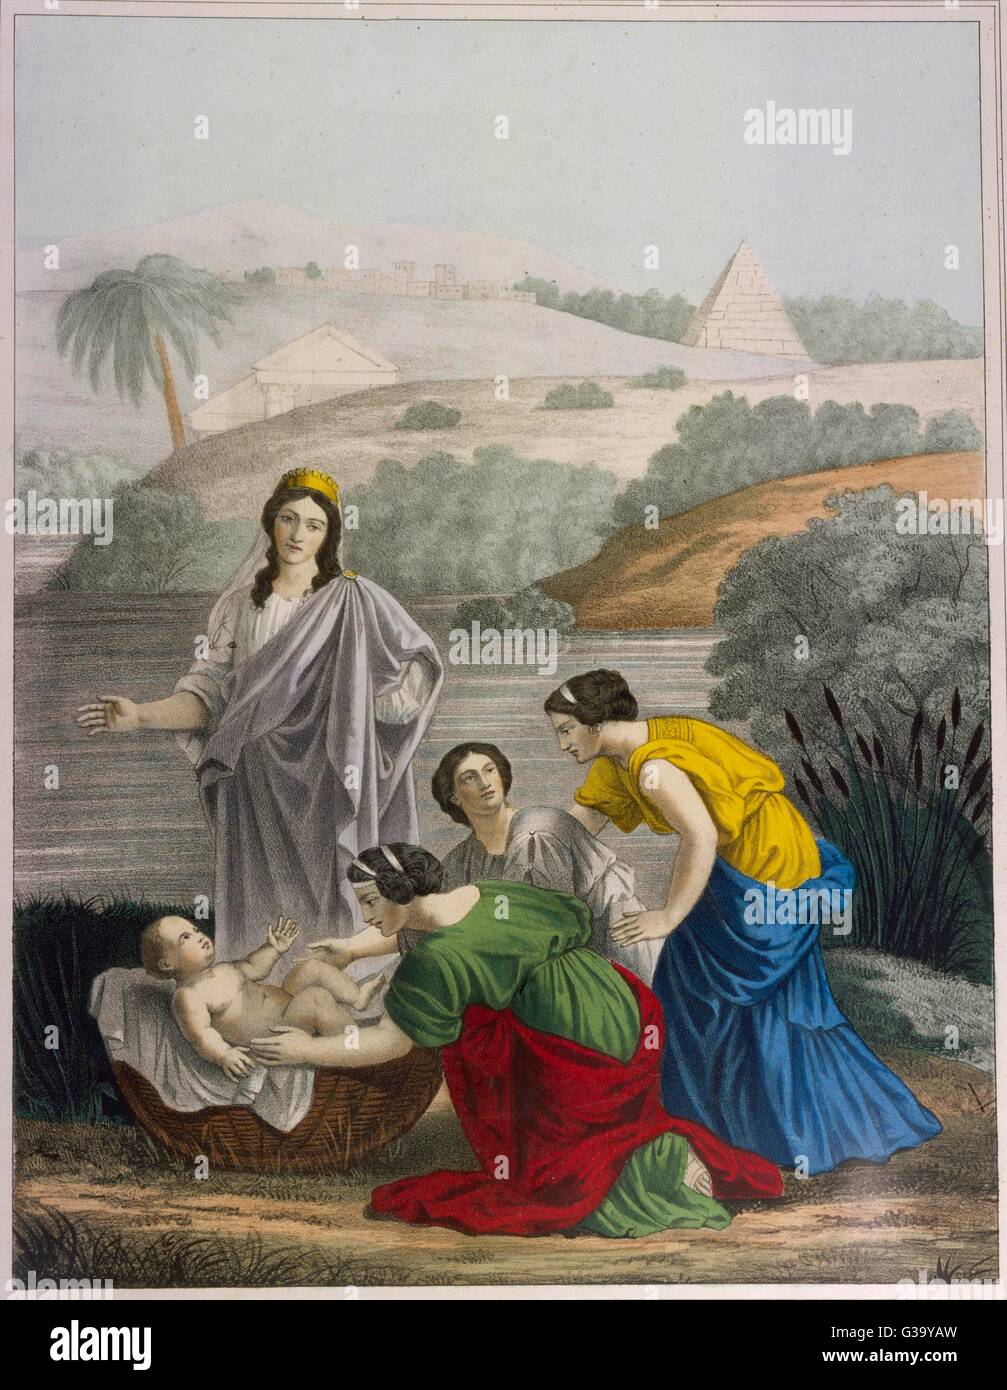 BABY MOSES SAVED Stock Photo